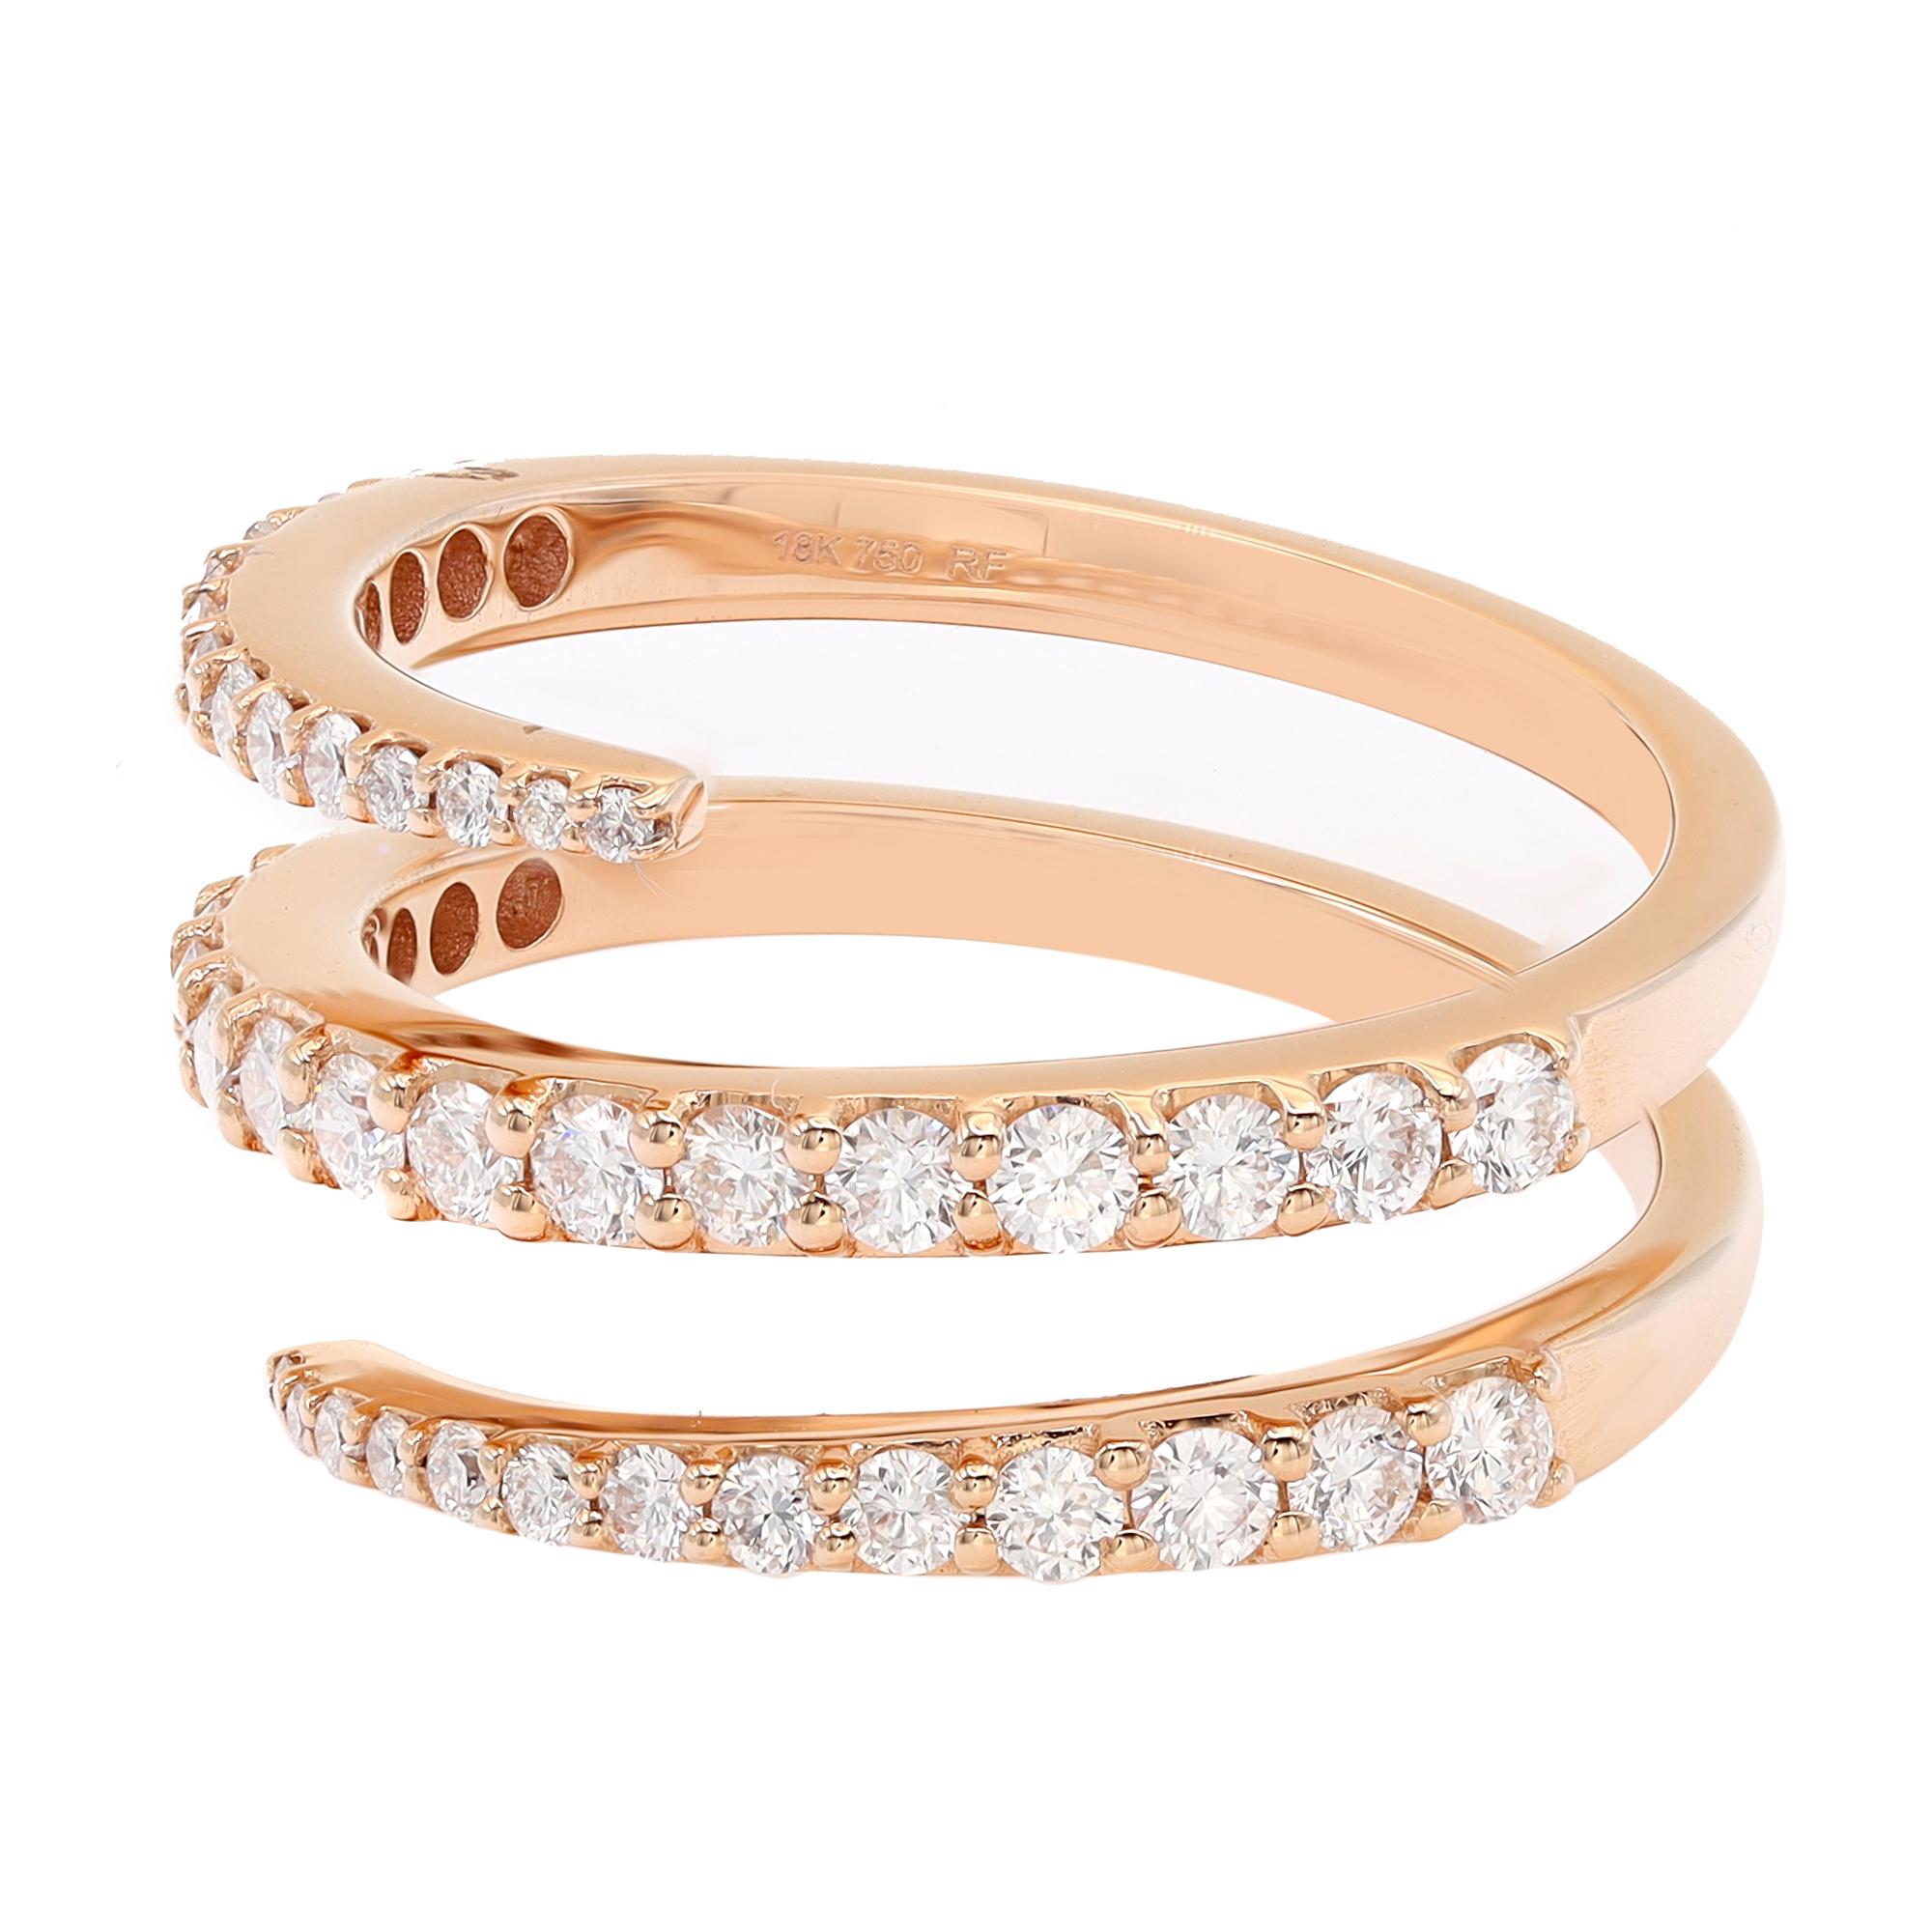 This beautiful spiral diamond ring is all about sparkle. Crafted in high polished 18k rose gold. This style features multi rows of round cut shimmering diamonds in prong setting. Total diamond weight: 0.83 carat. Diamond quality: G-H color and VS-SI